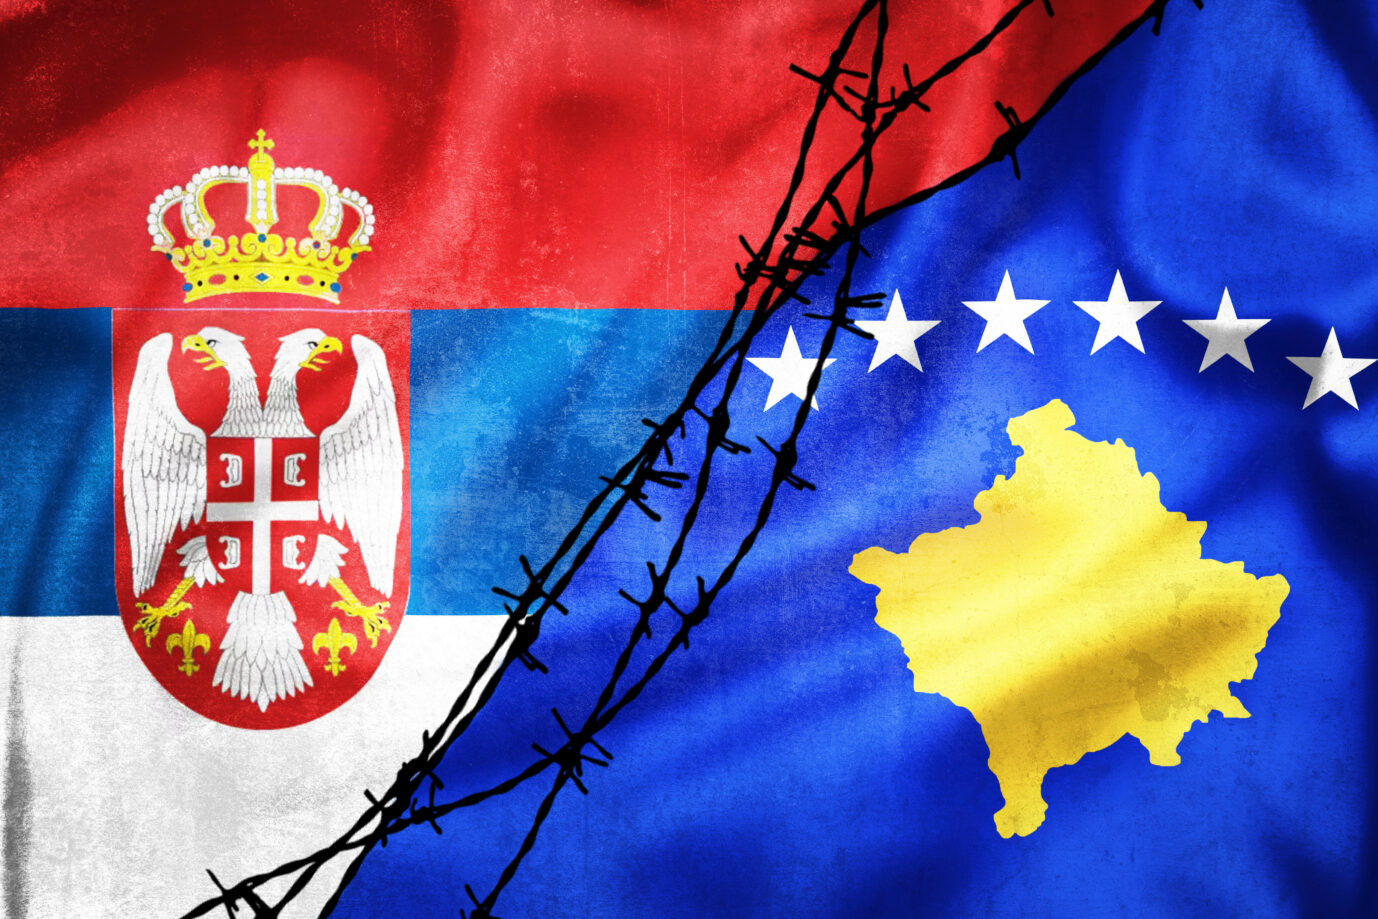 Grunge flags of Serbia and Kosovo divided by barb wire illustration, concept of tense relations between Serbia and Kosovo